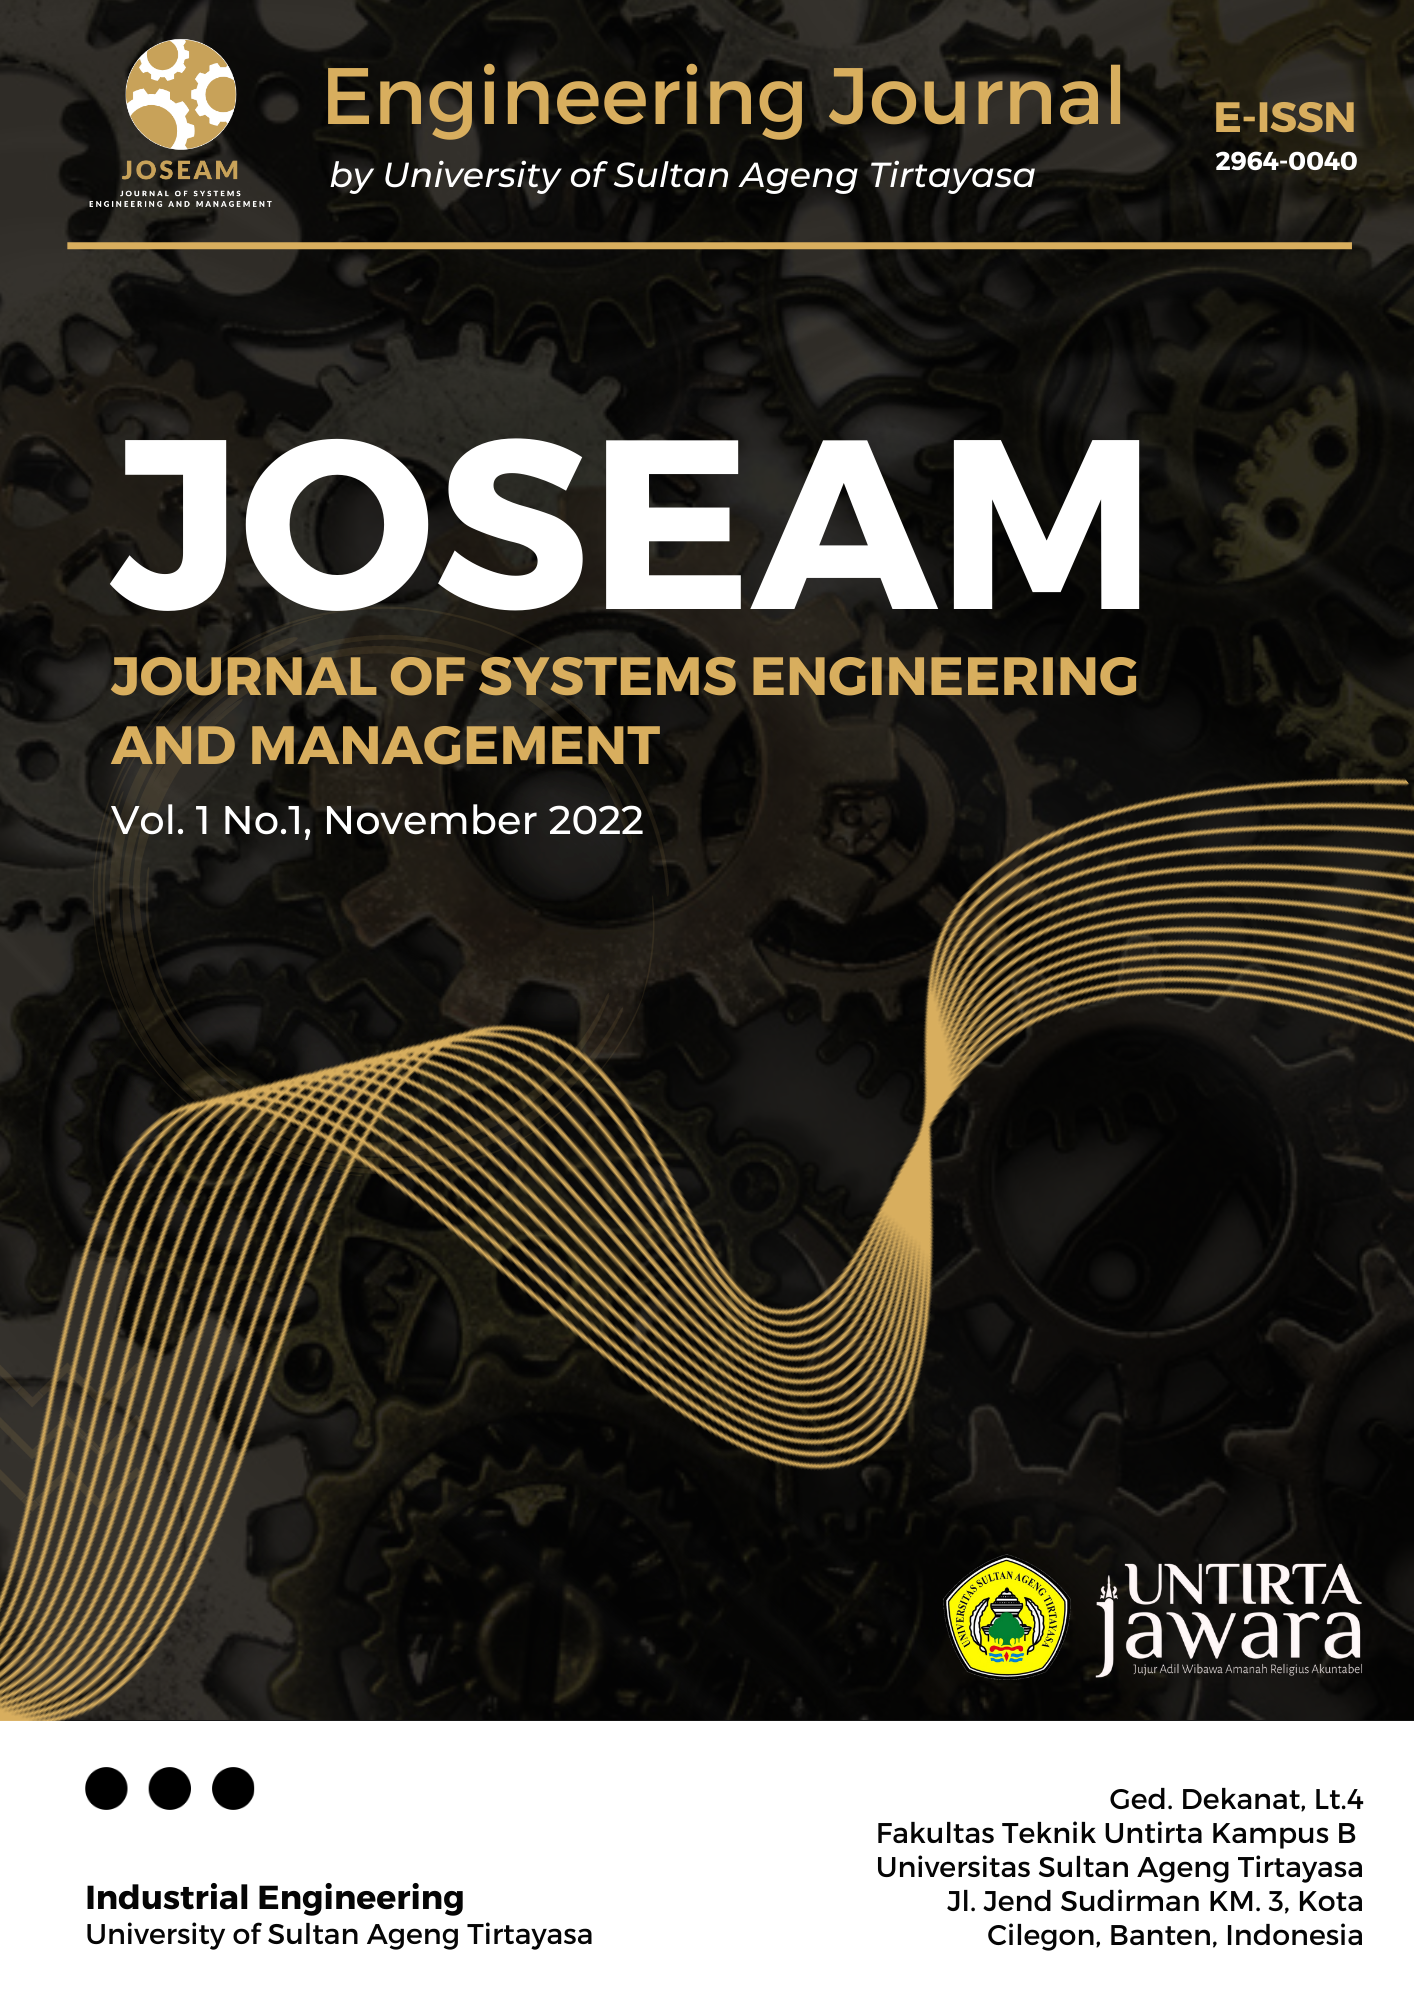 Journal of Systems Engineering and Management